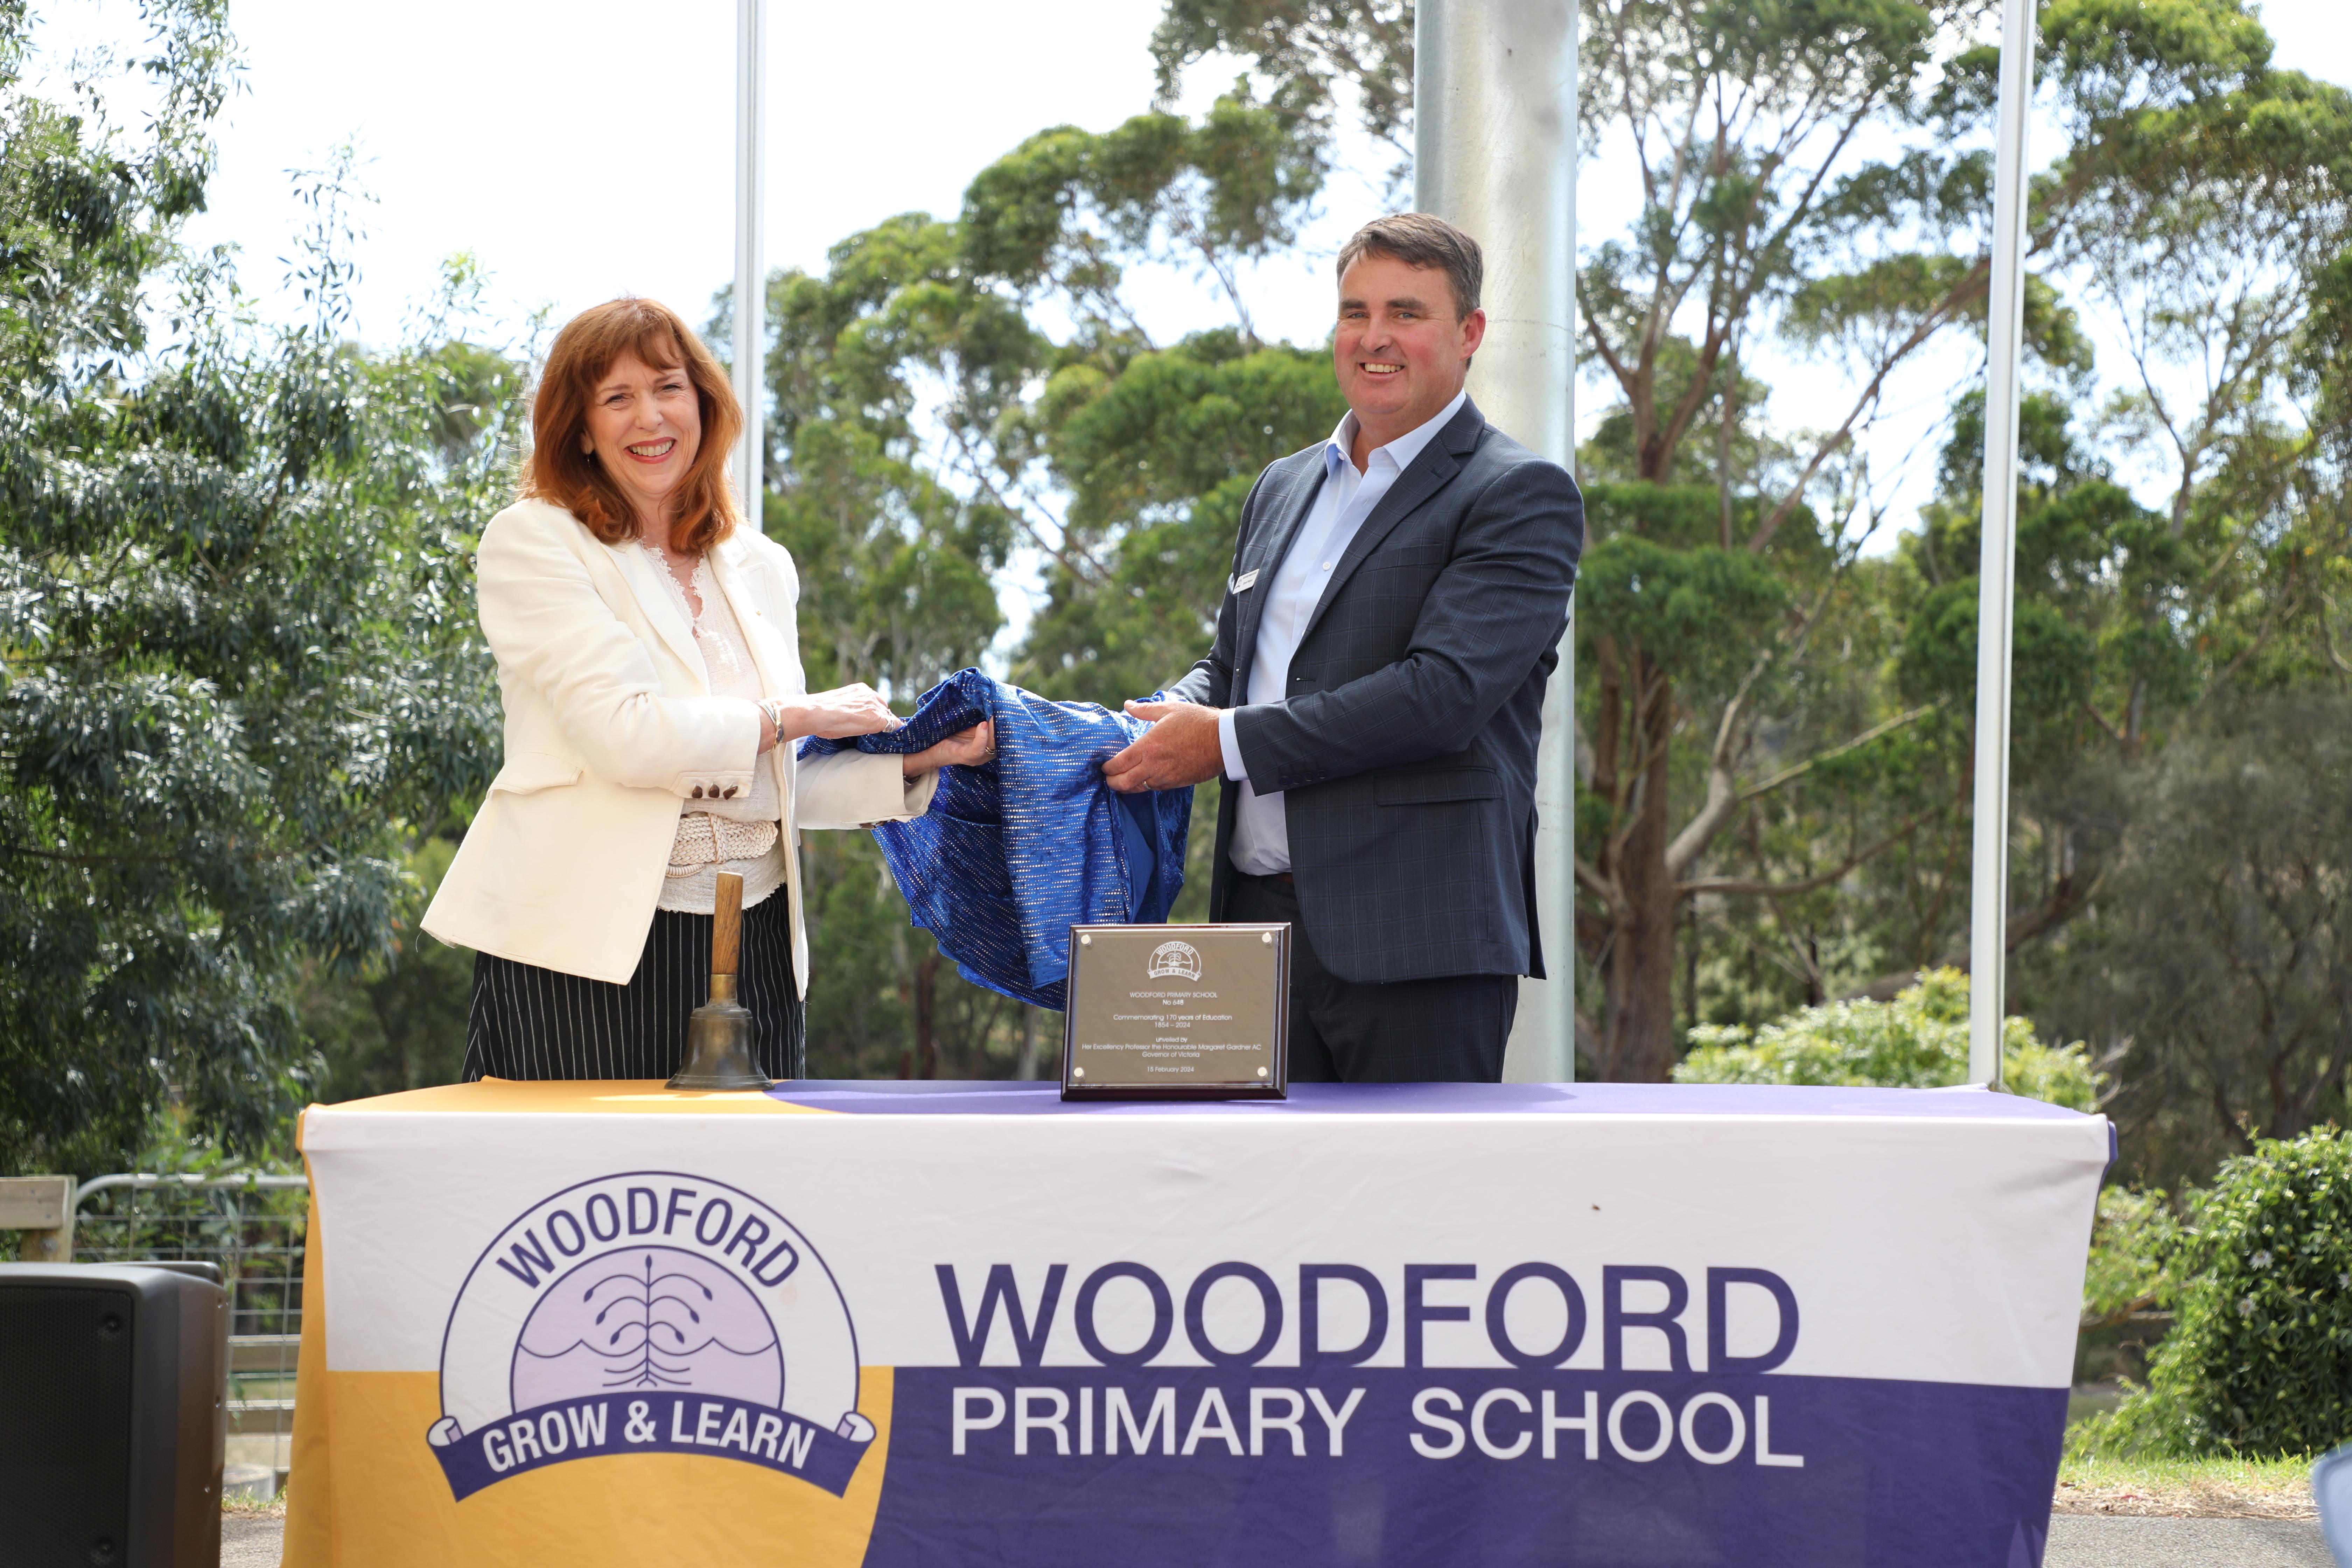 The Governor at Woodford Primary School